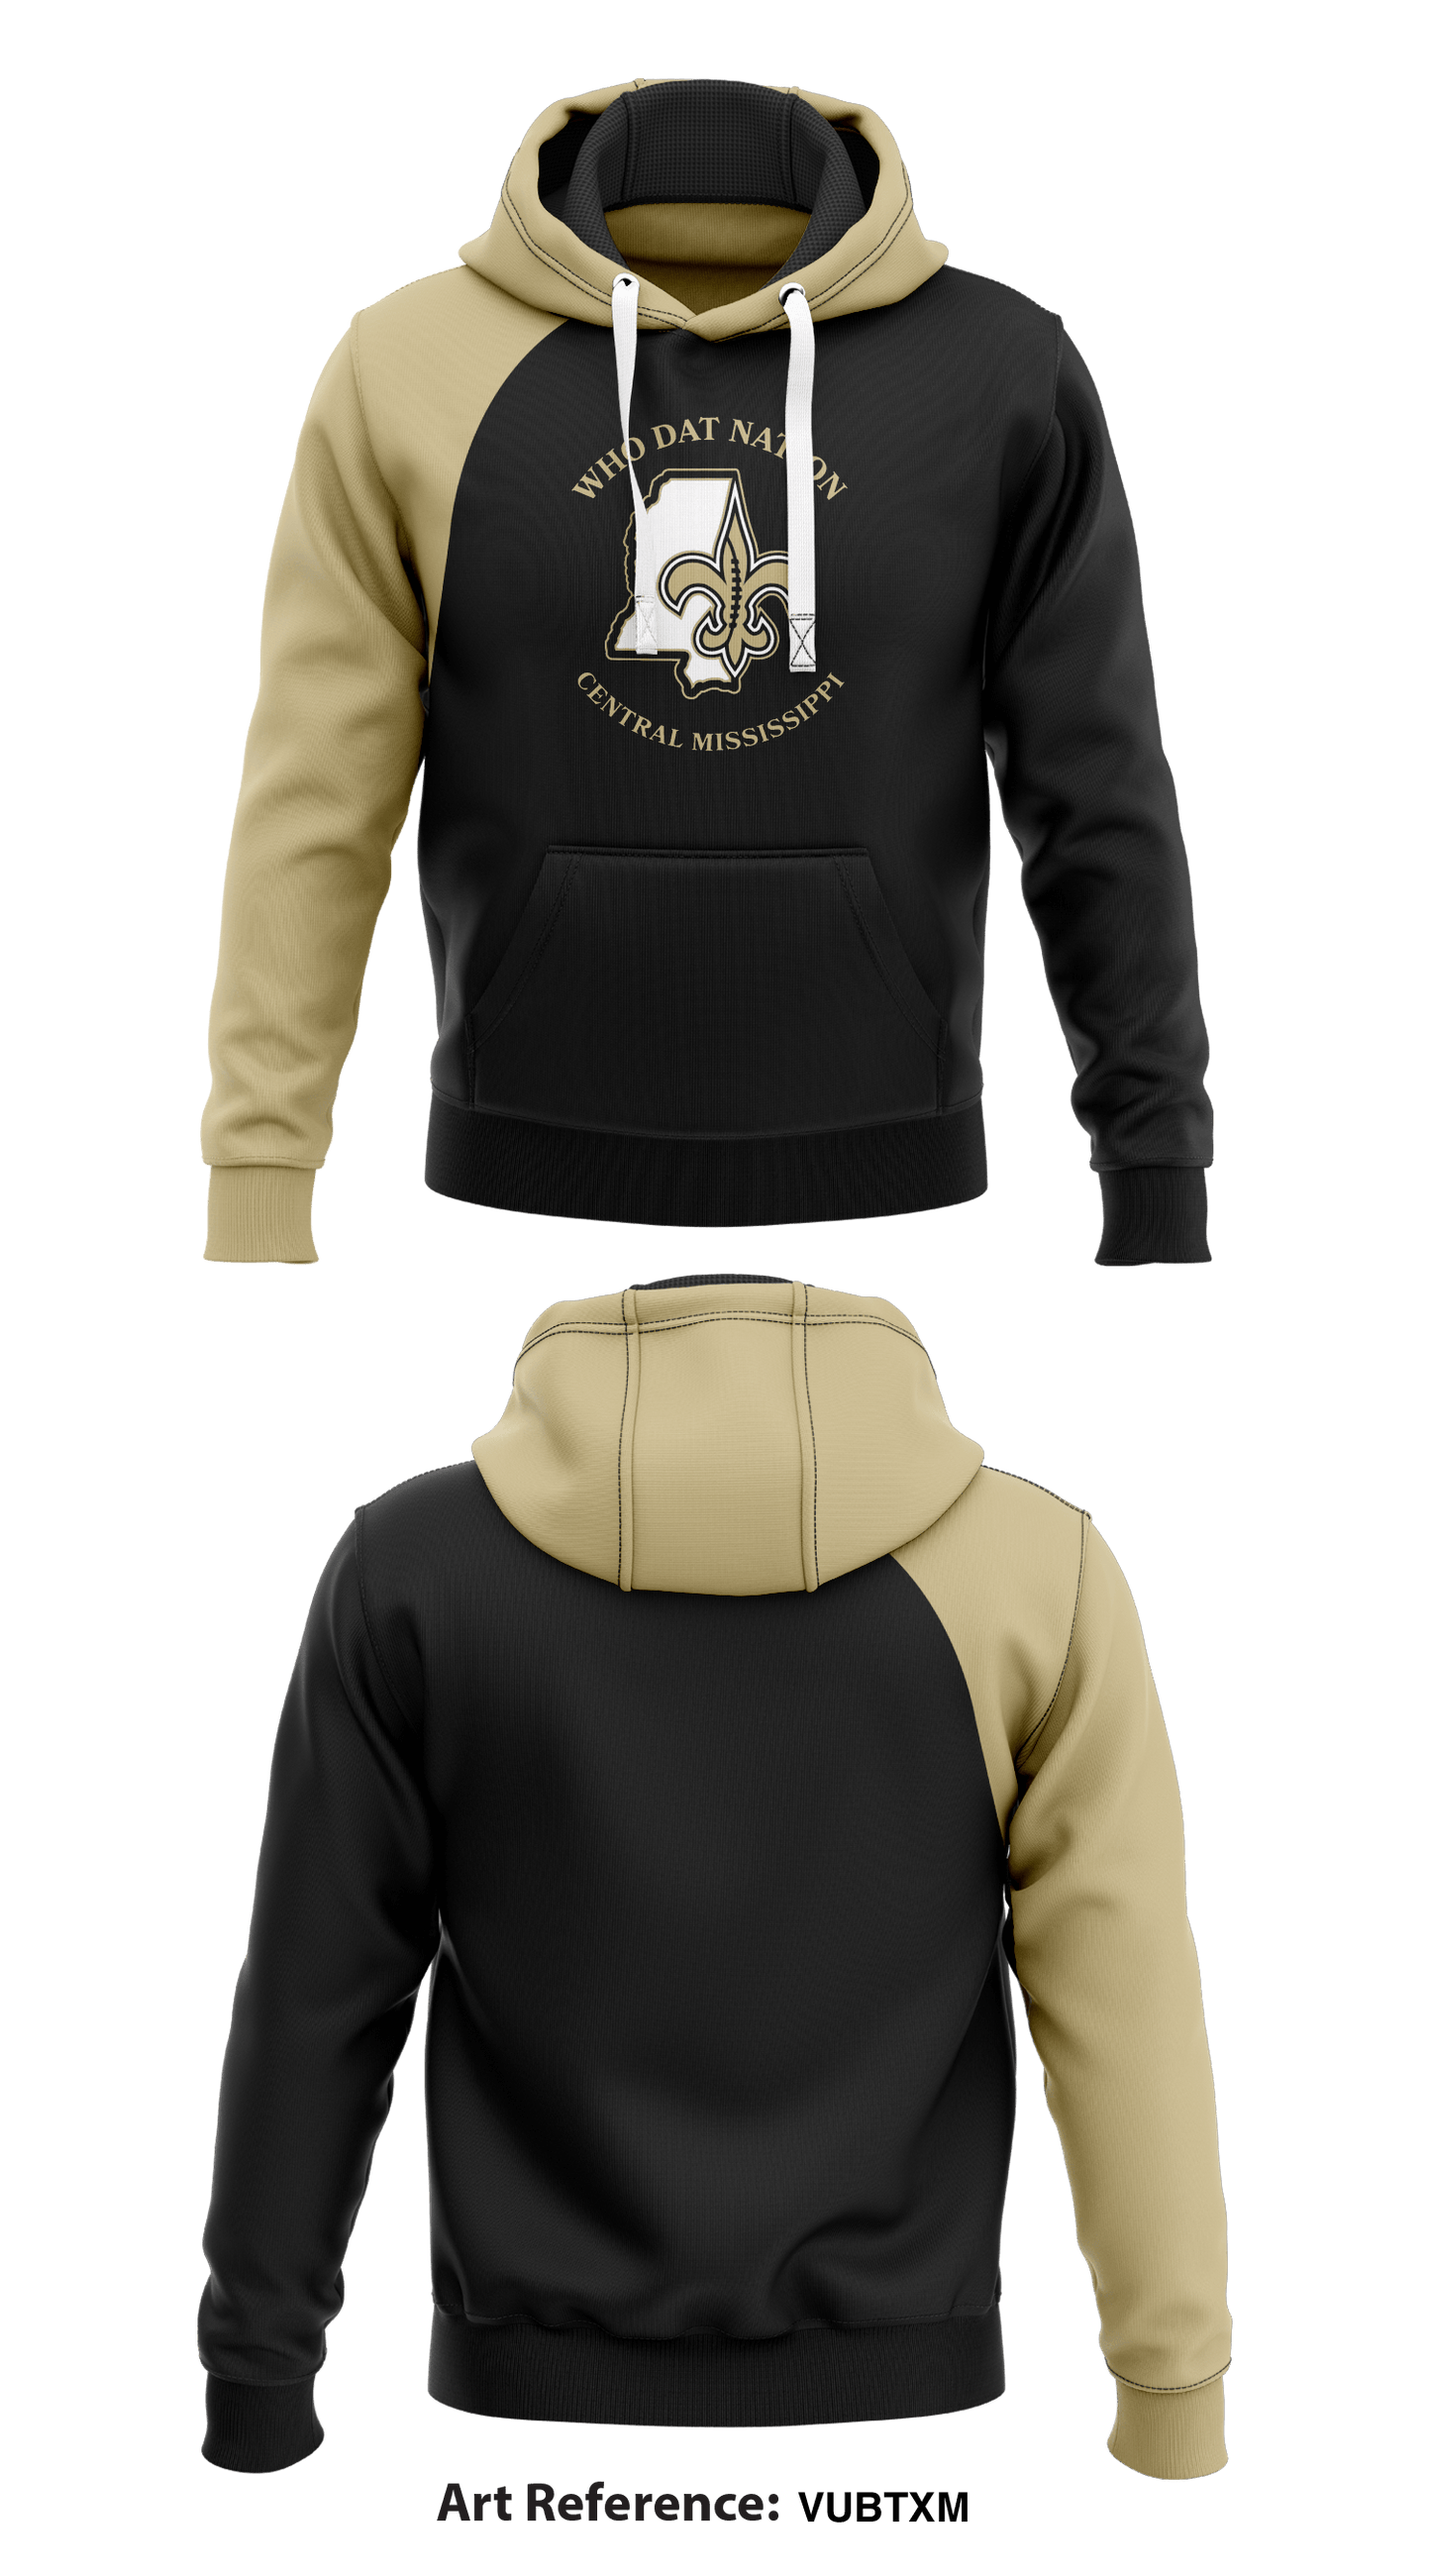 Who Dat Nations of Central Mississippi Store 1  Core Men's Hooded Performance Sweatshirt - VubtxM